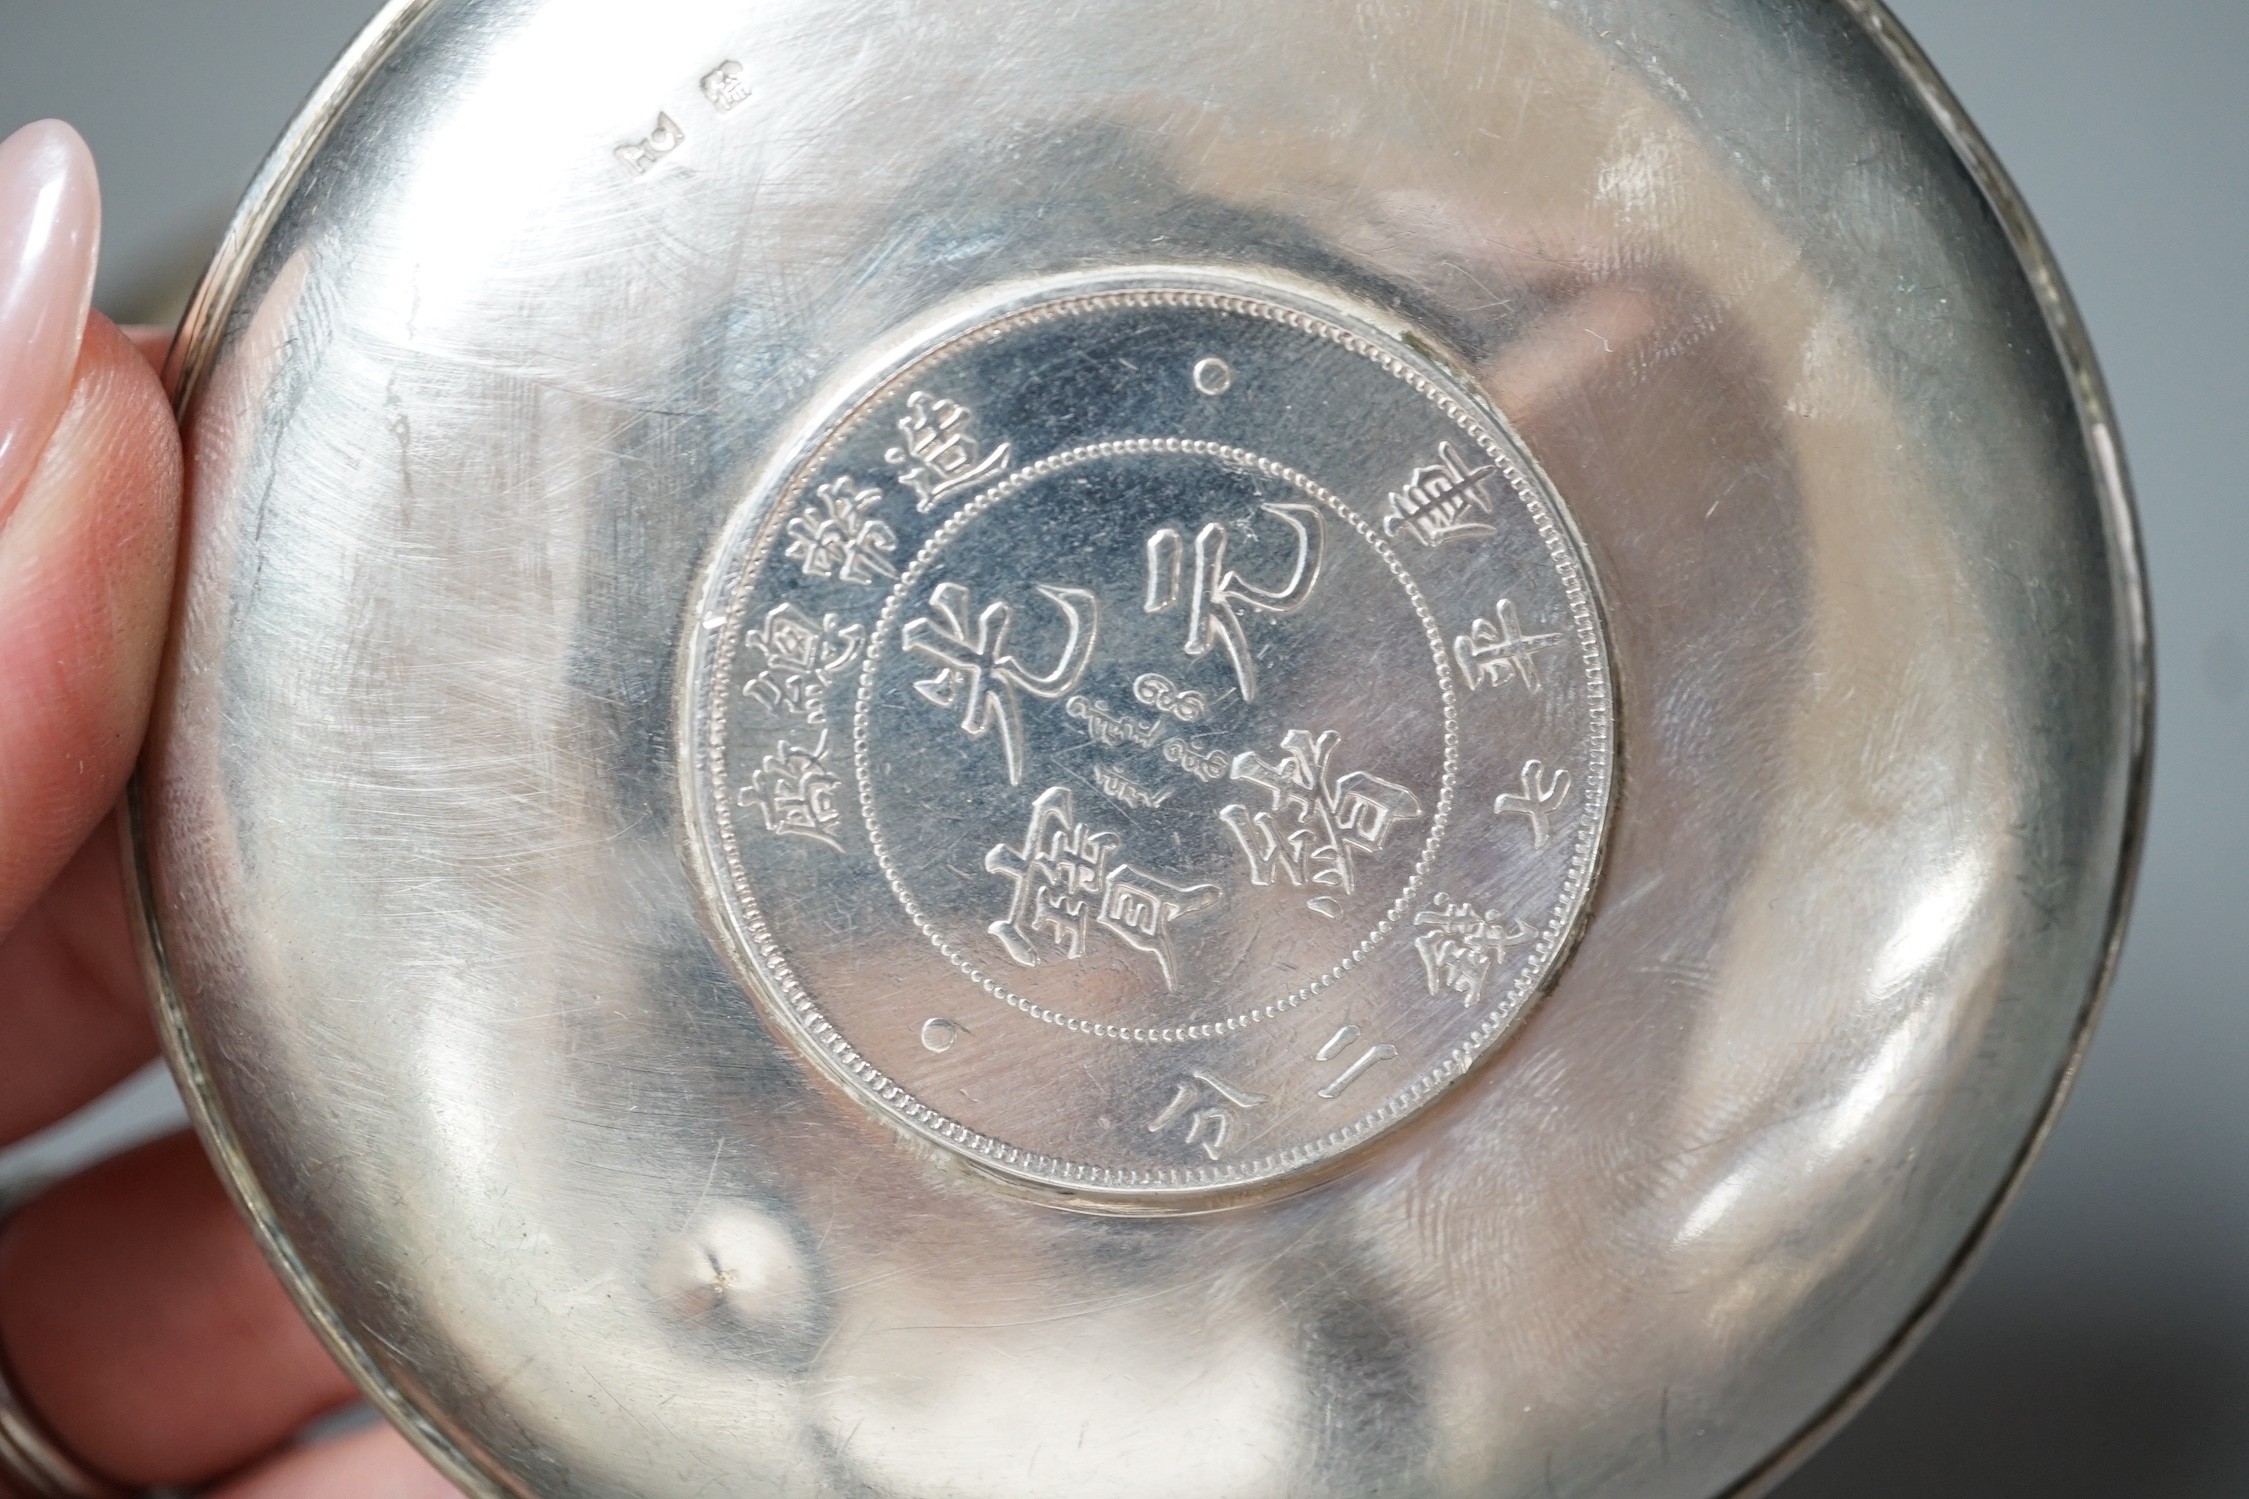 Three Chinese white metal dishes, each inset with coin, maker HC, 94mm, 196 grams gross.